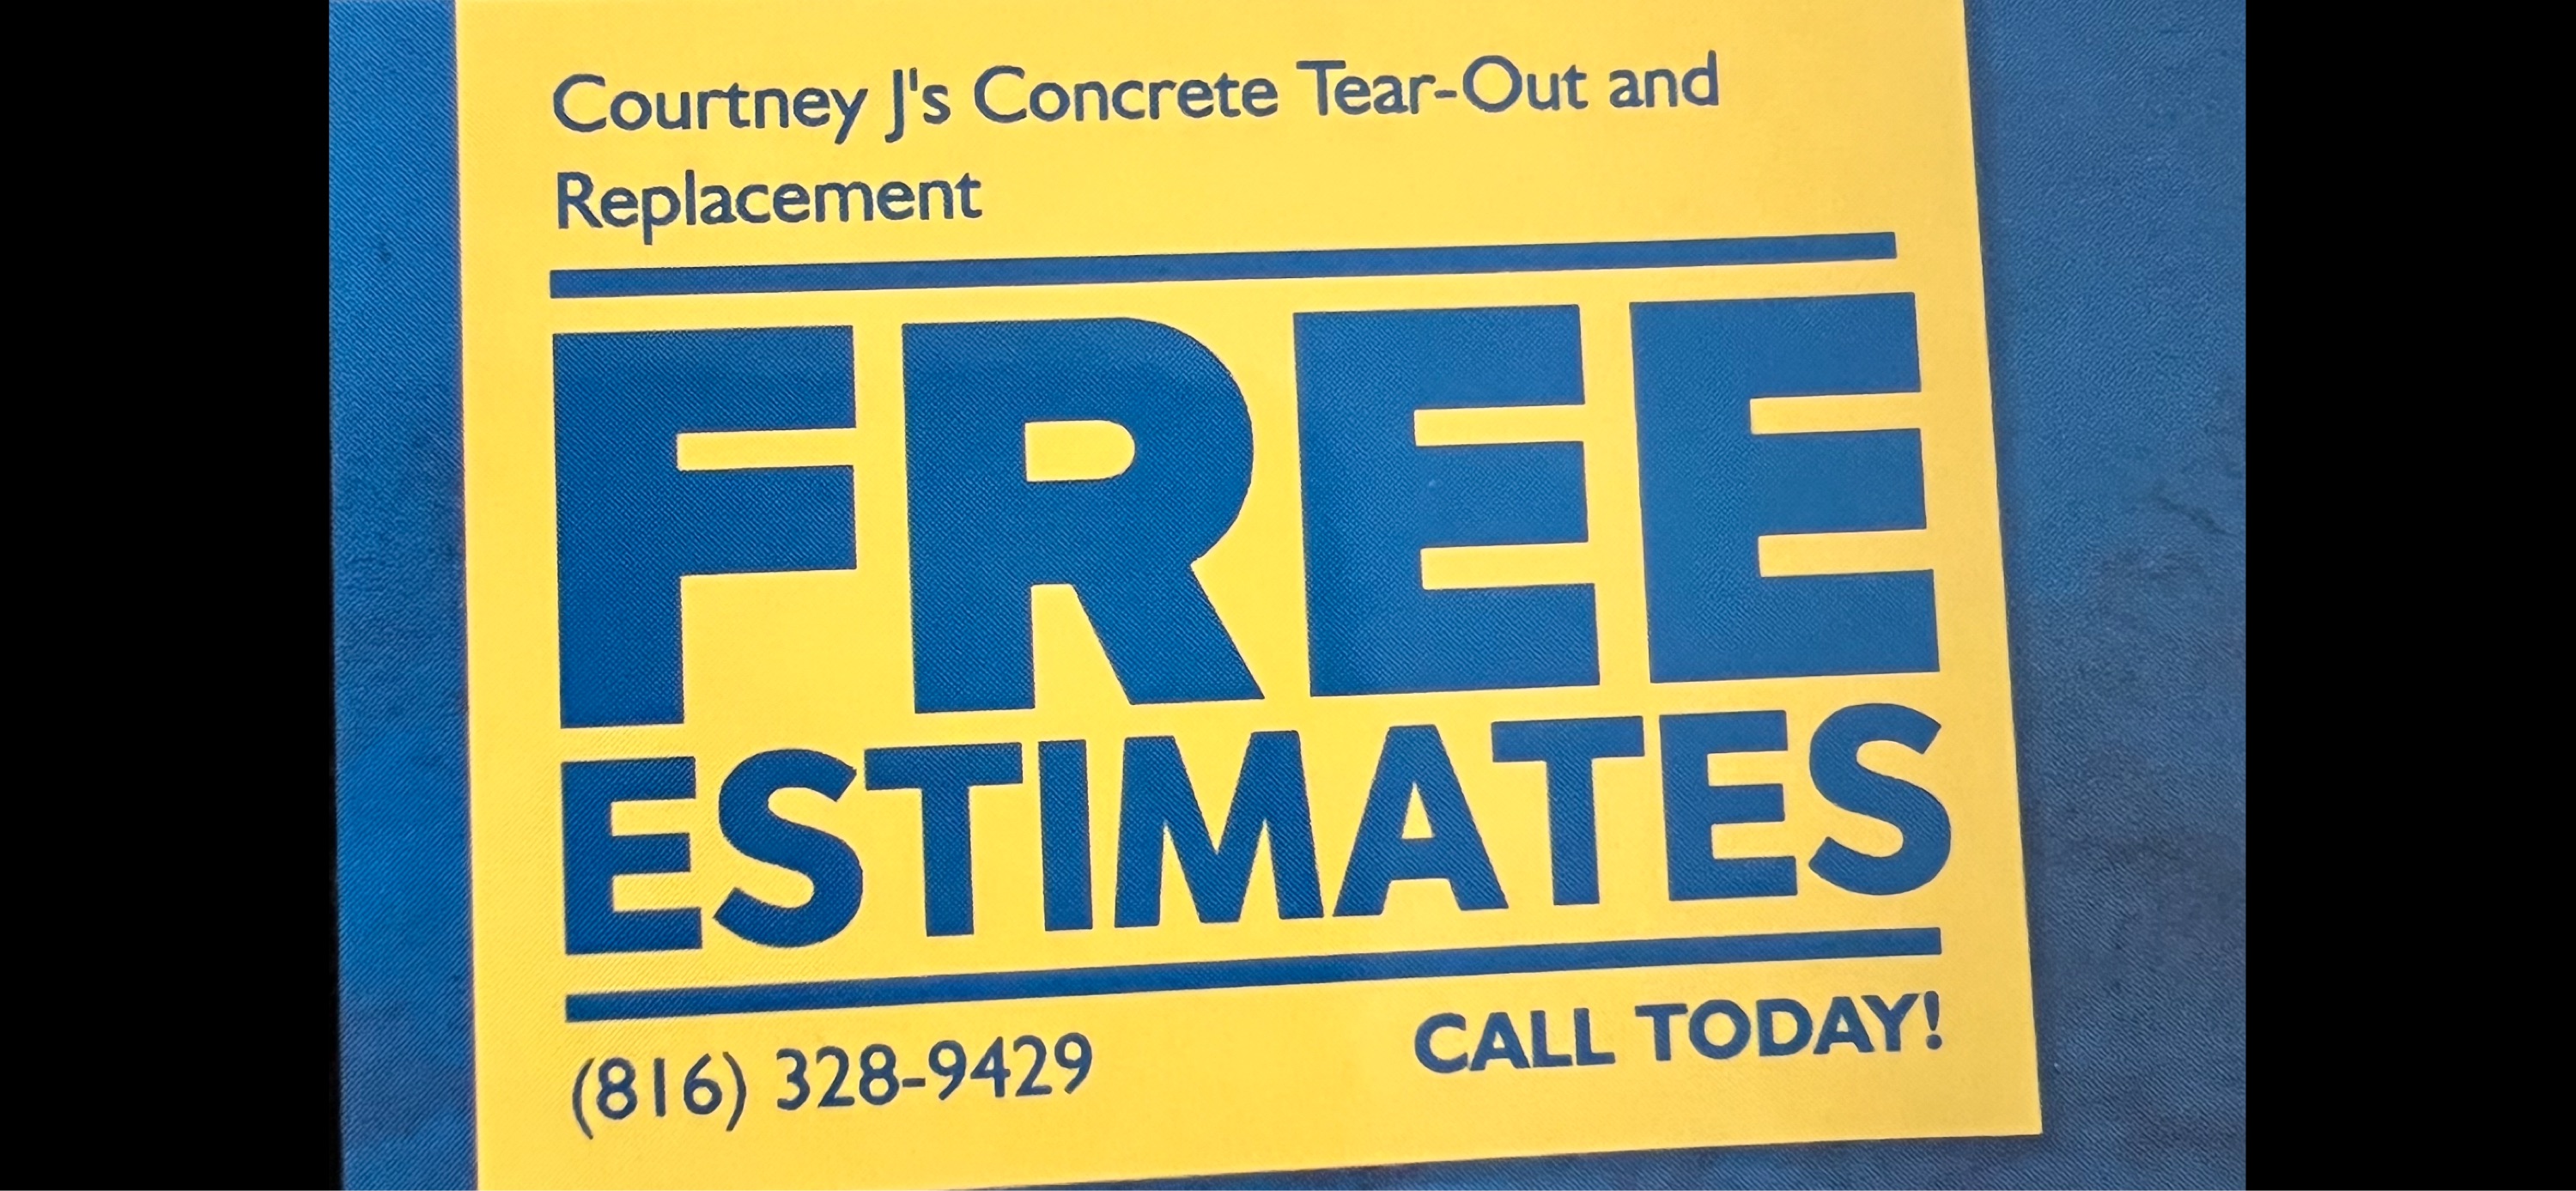 Courtney J's Concrete Tear-out and Replacement, LLC Logo